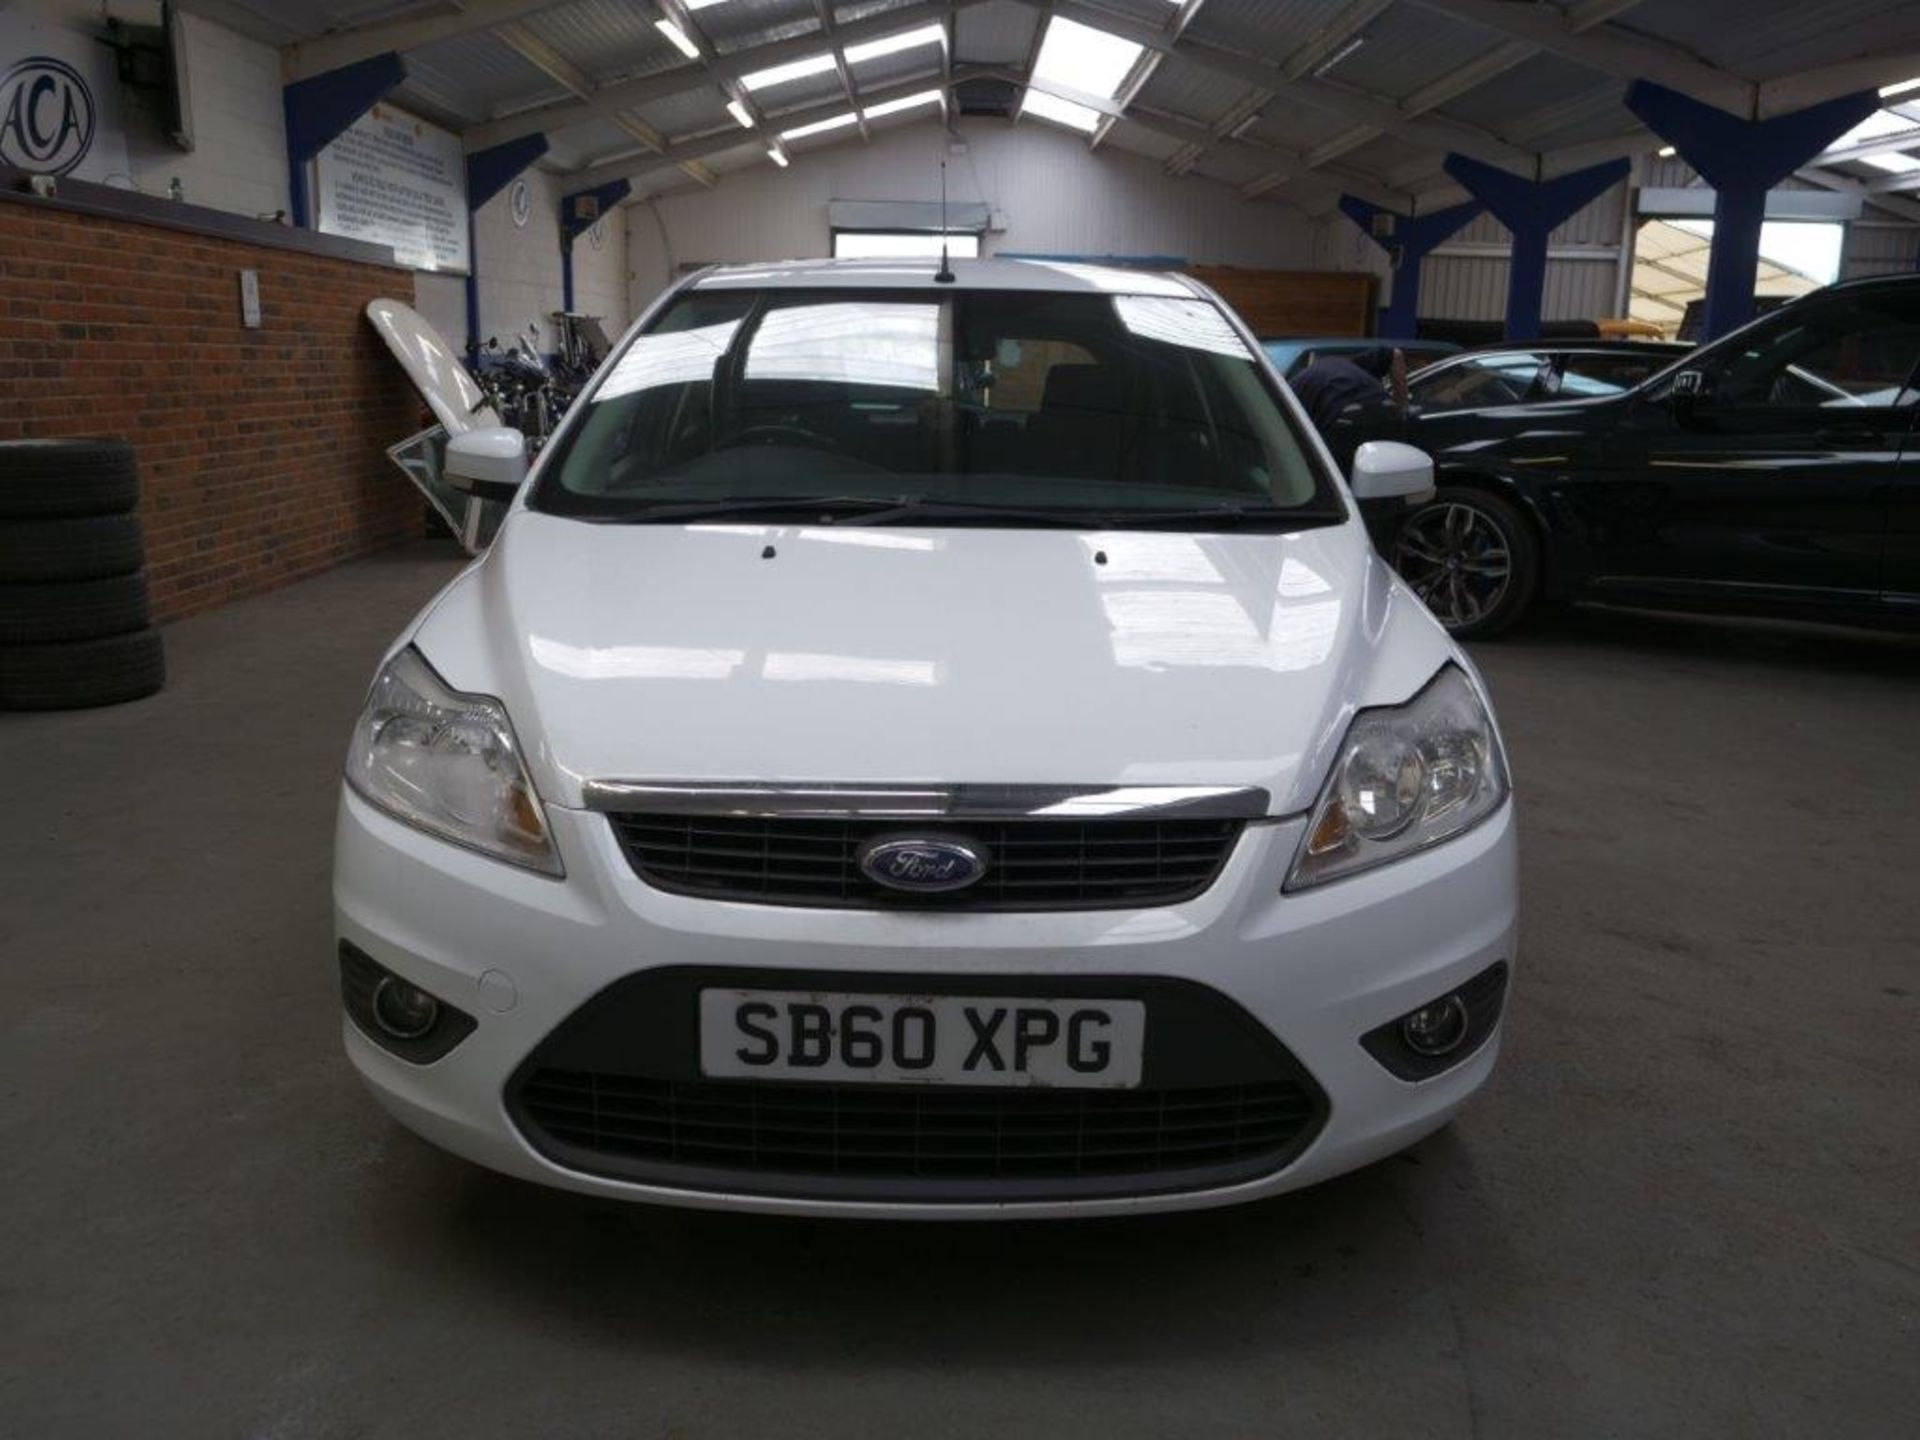 60 11 Ford Focus Sport - Image 2 of 34